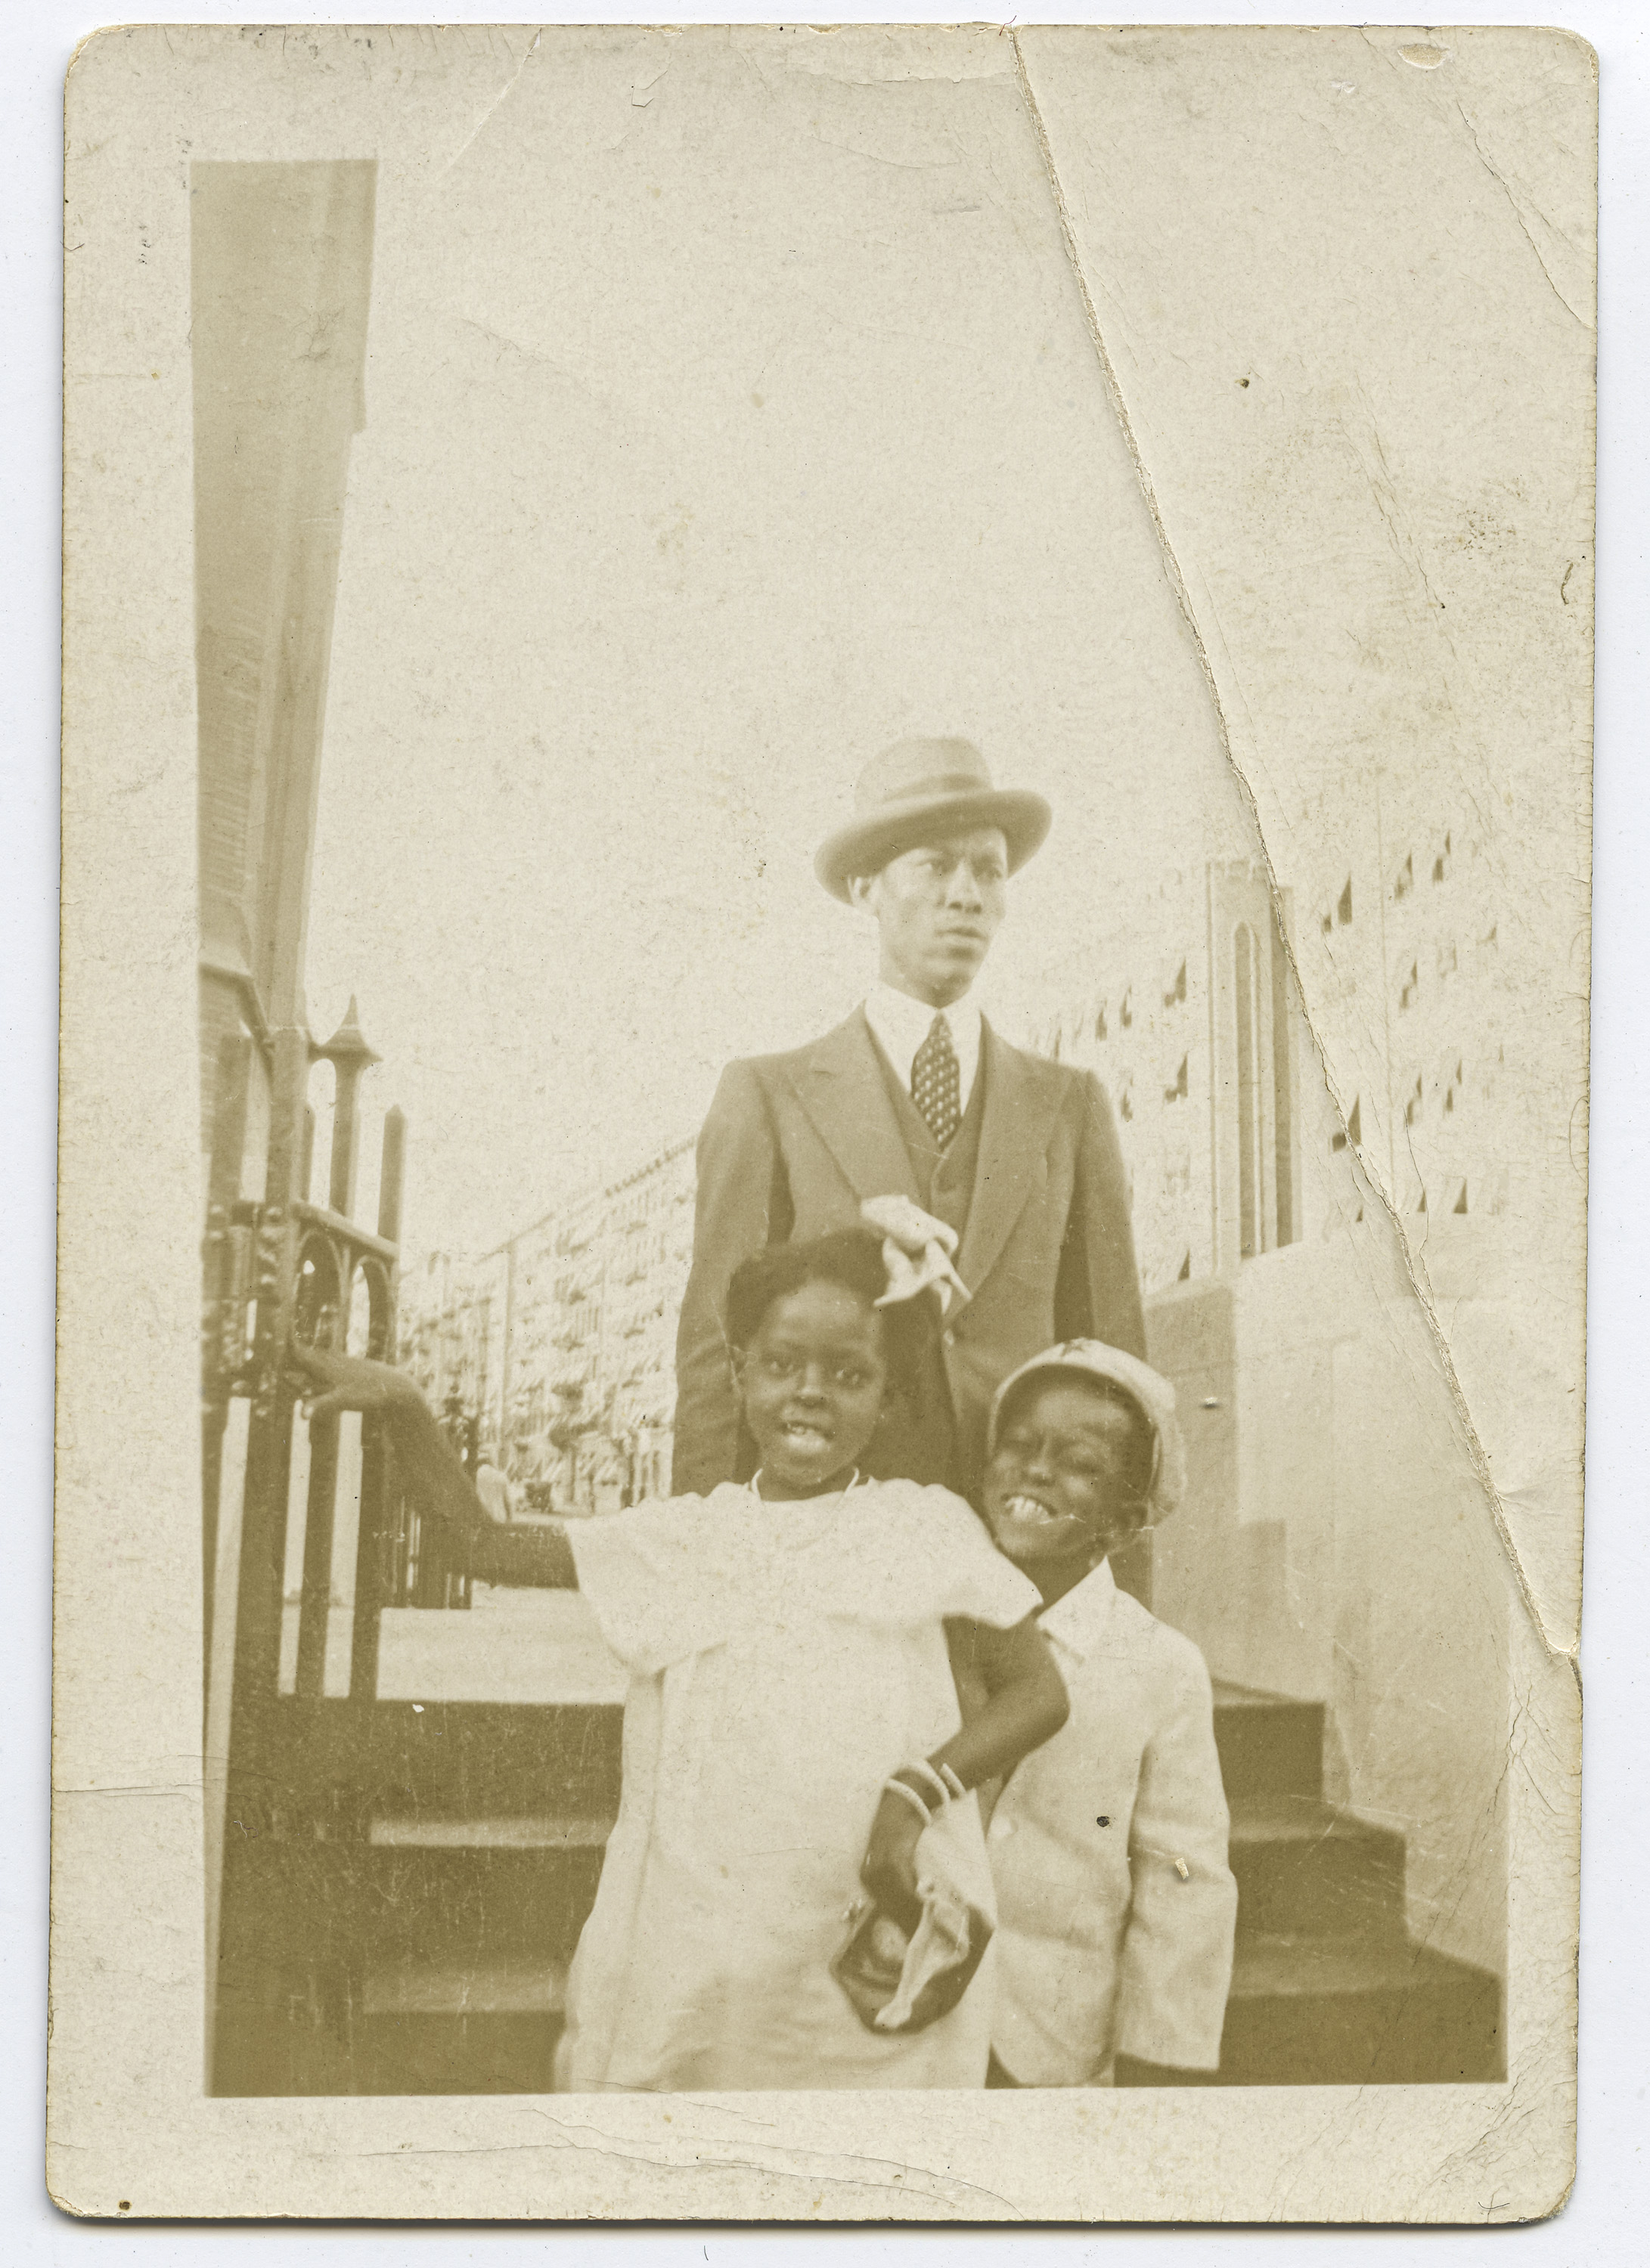 Carmen with father, Edgar Inniss, and older brother, Bernard, in Harlem, NY in 1930s.